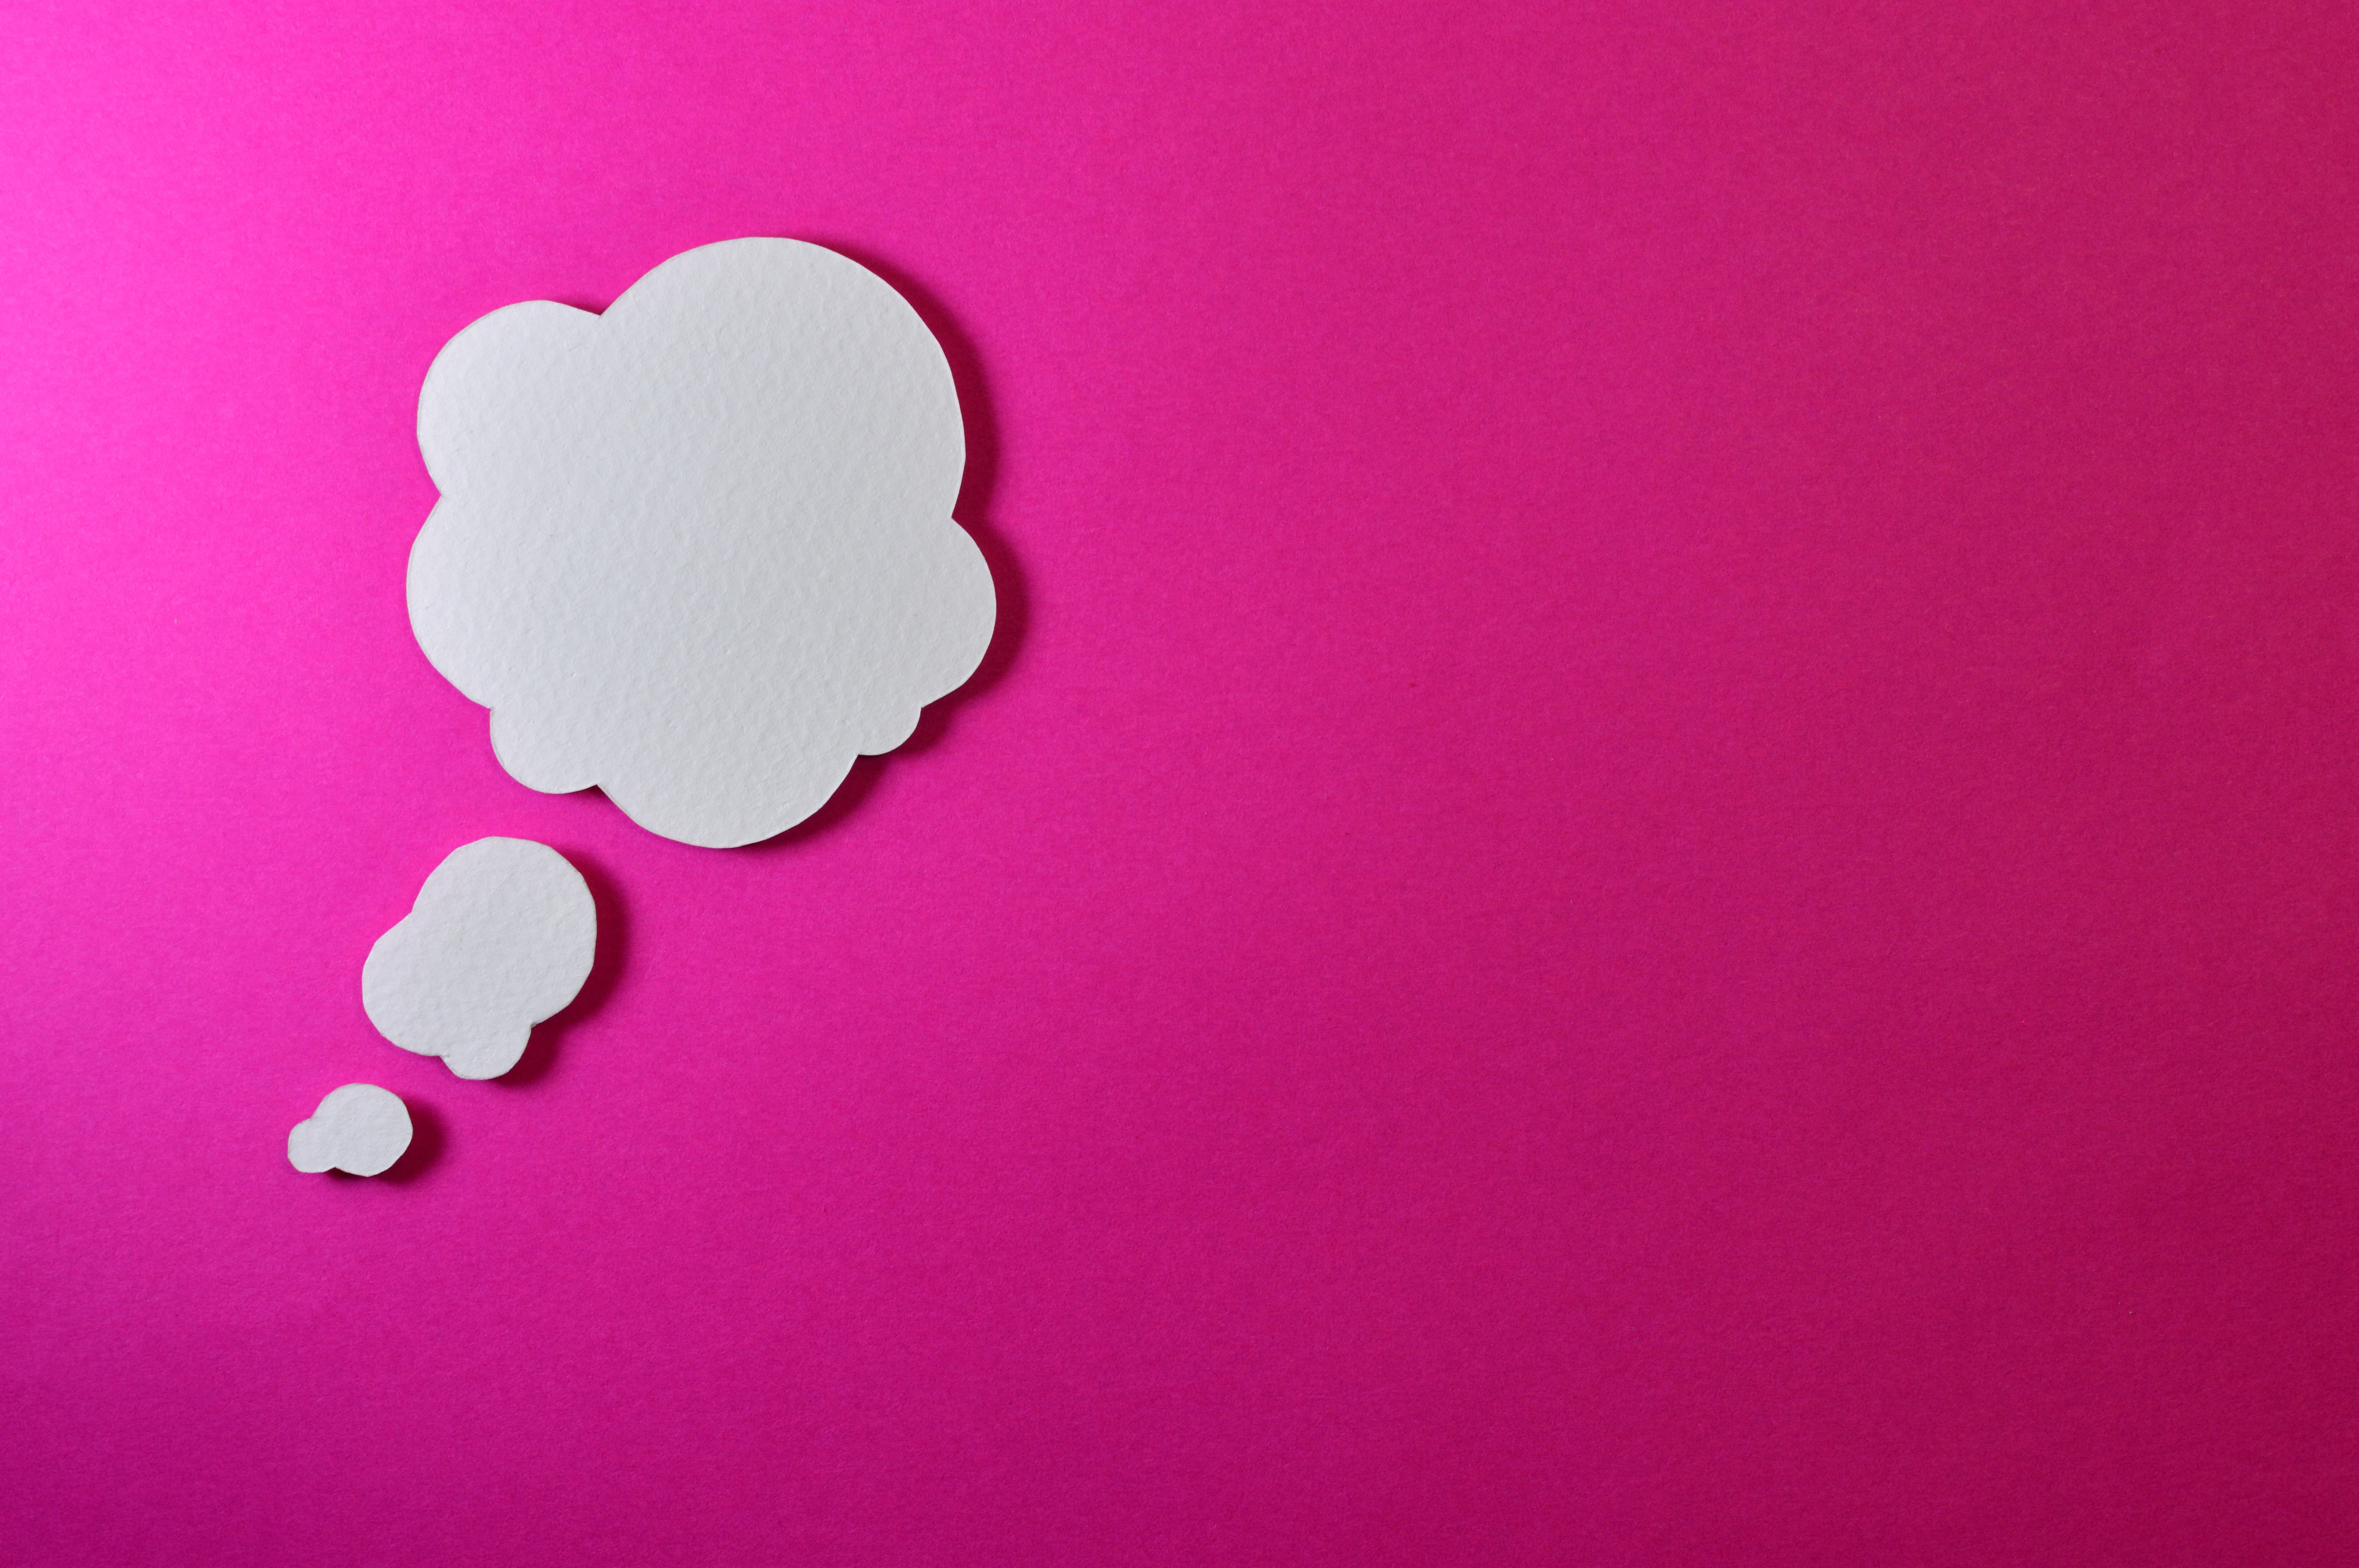 Thought cloud bubble on a pink background